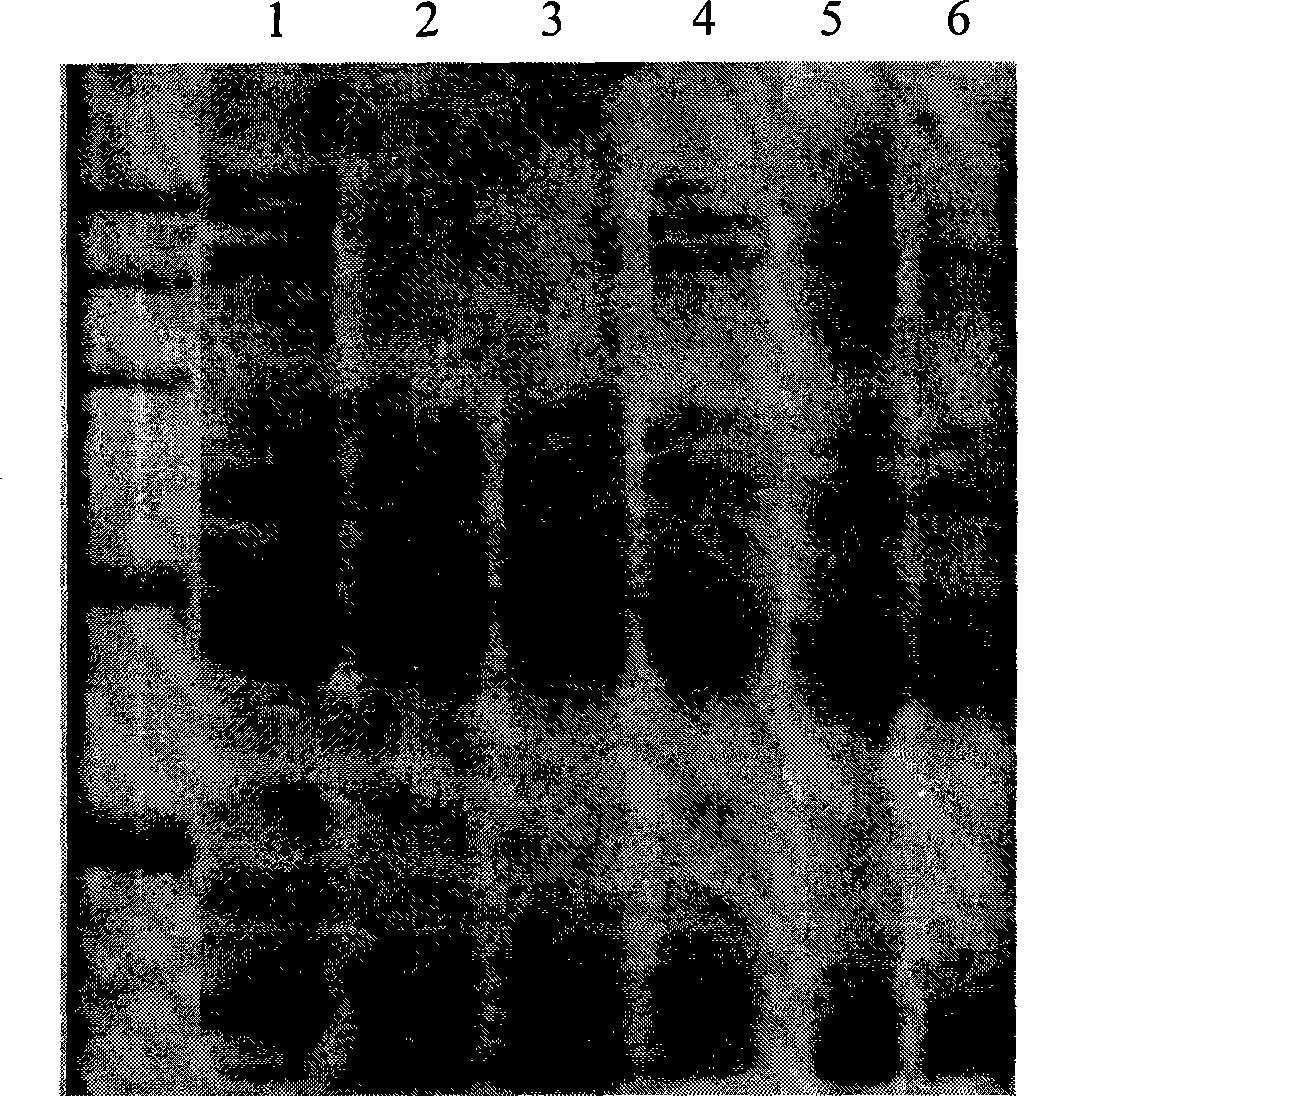 Method for deamidation and modification of wheat flour gluten protein using organic acid